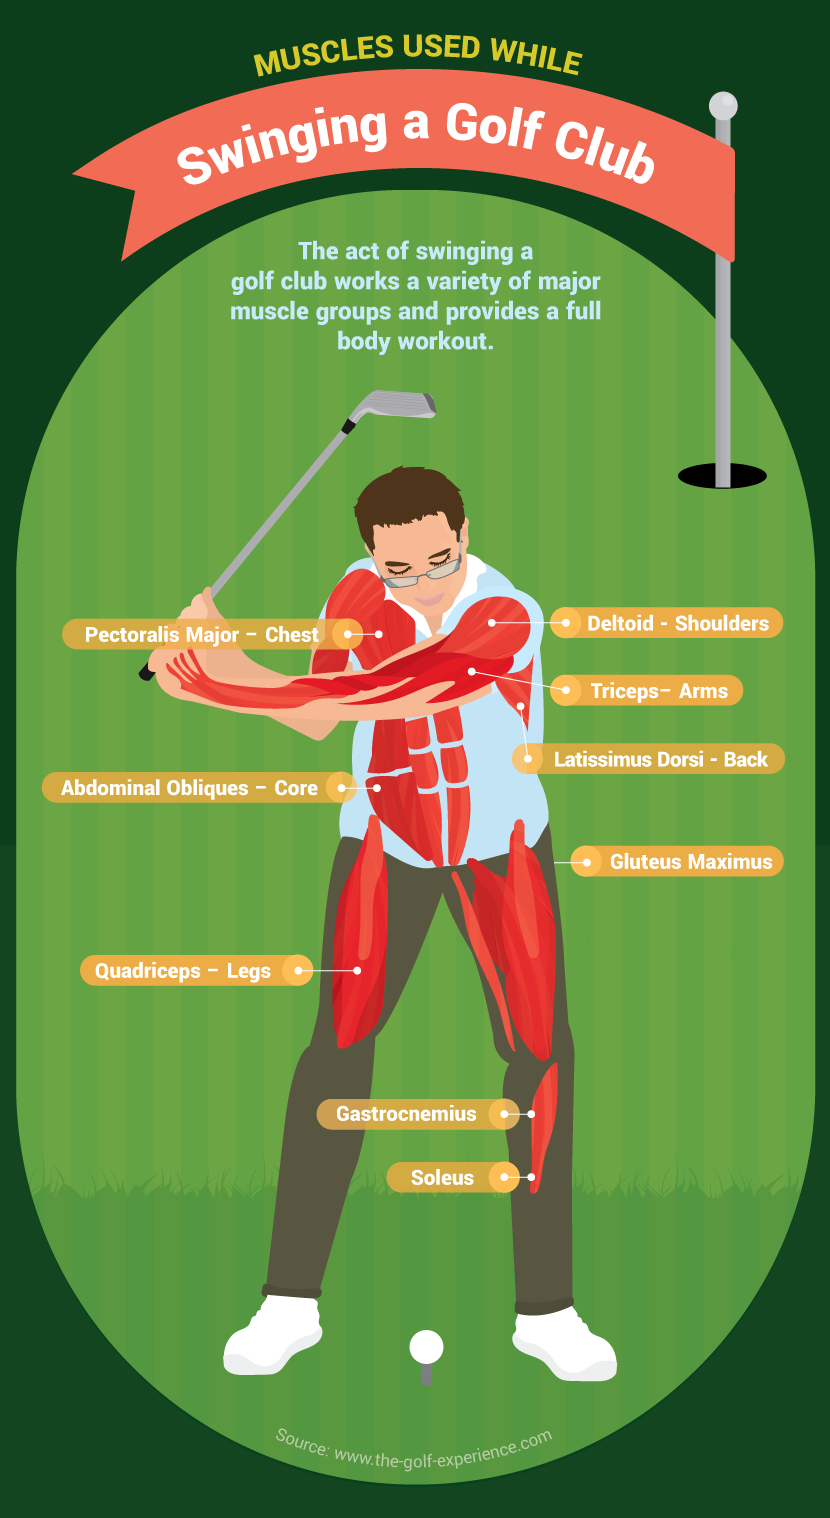 Muscles Used Swinging a Golf Club - Golf and Wellness